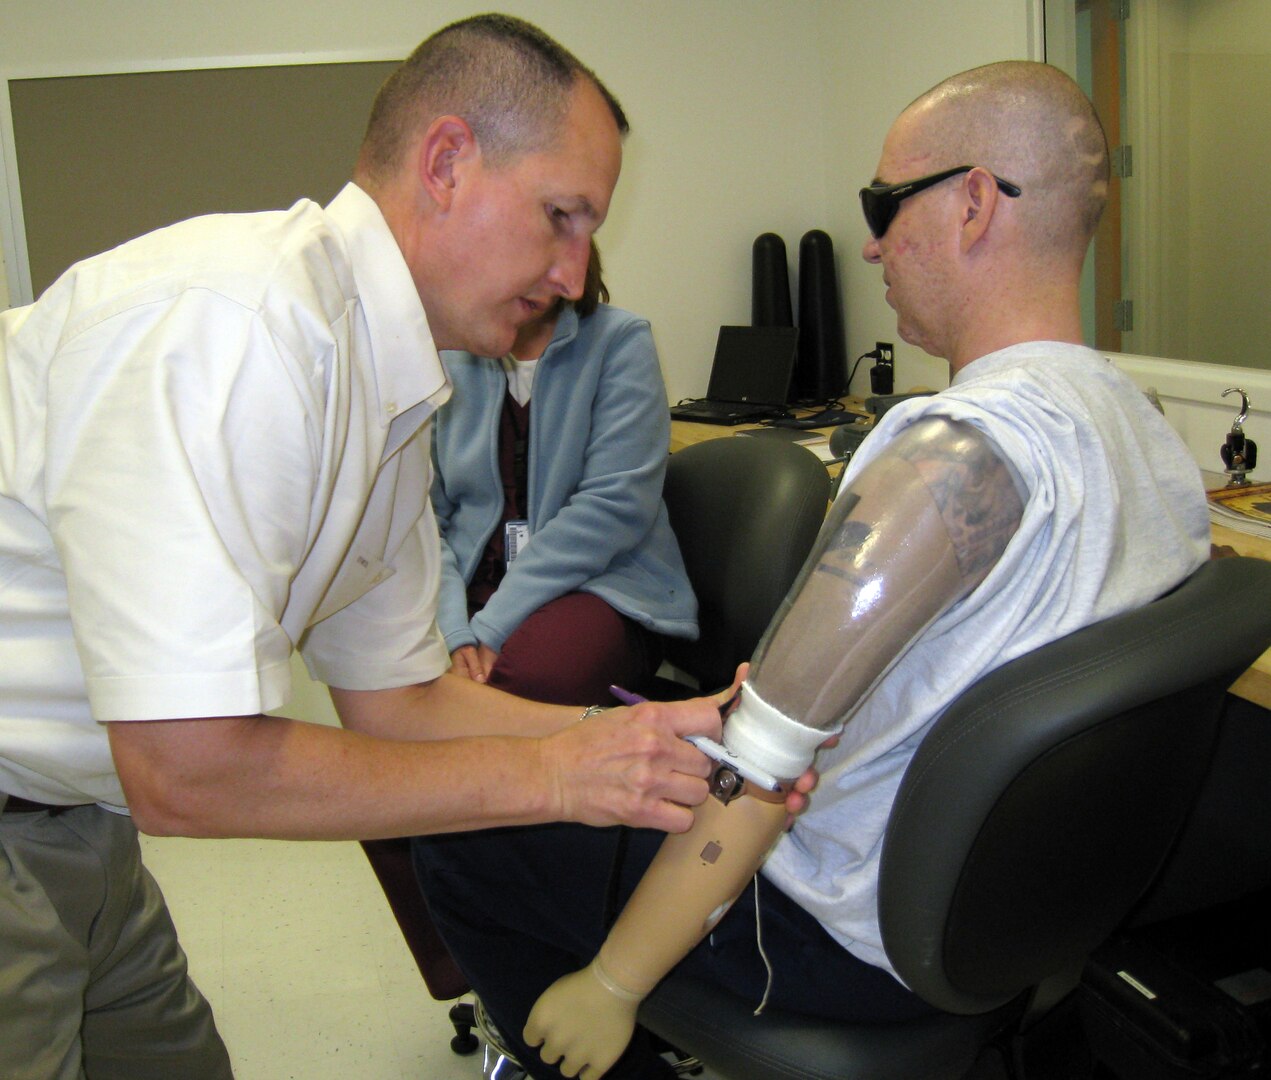 Del Lipe (left), a prosthetist, works to fit a prosthetic arm on Staff Sgt. Matthew Slaydon during his rehabilitation at Brooke Army Medical Center in San Antonio. (Courtesy photo)